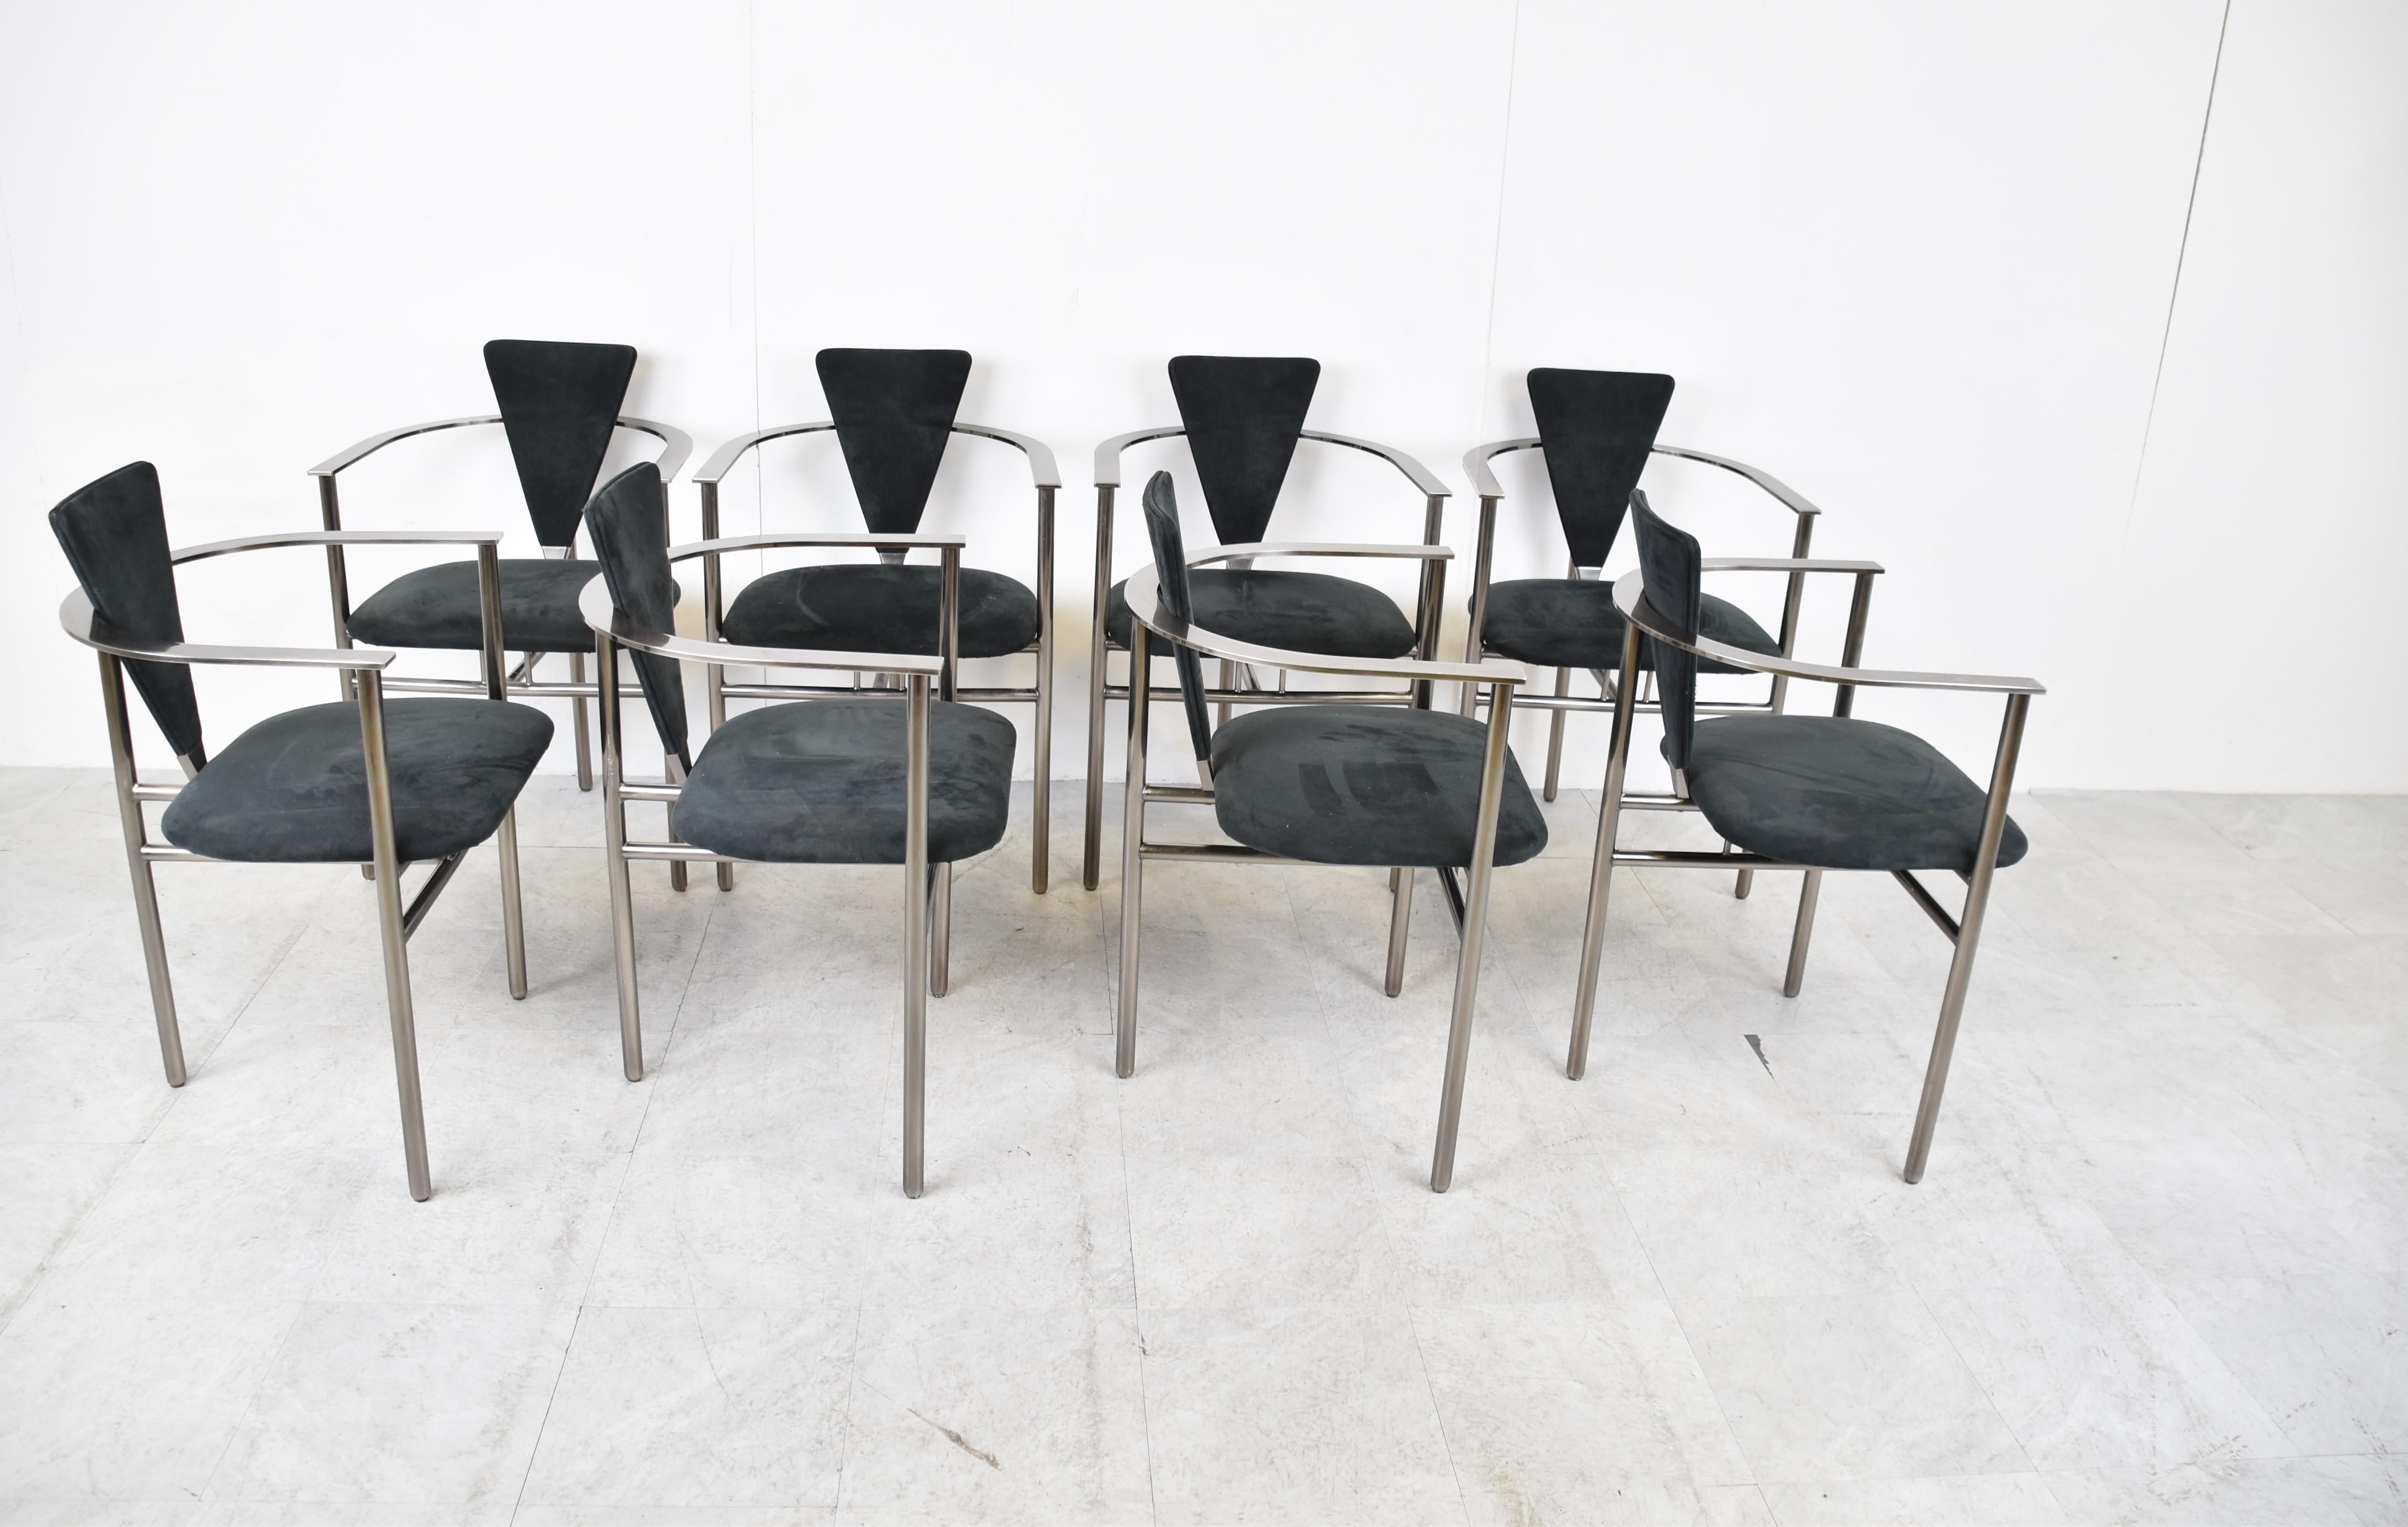 Steel Set of 8 Post Modern Dining Chairs by Belgochrom, 1980s